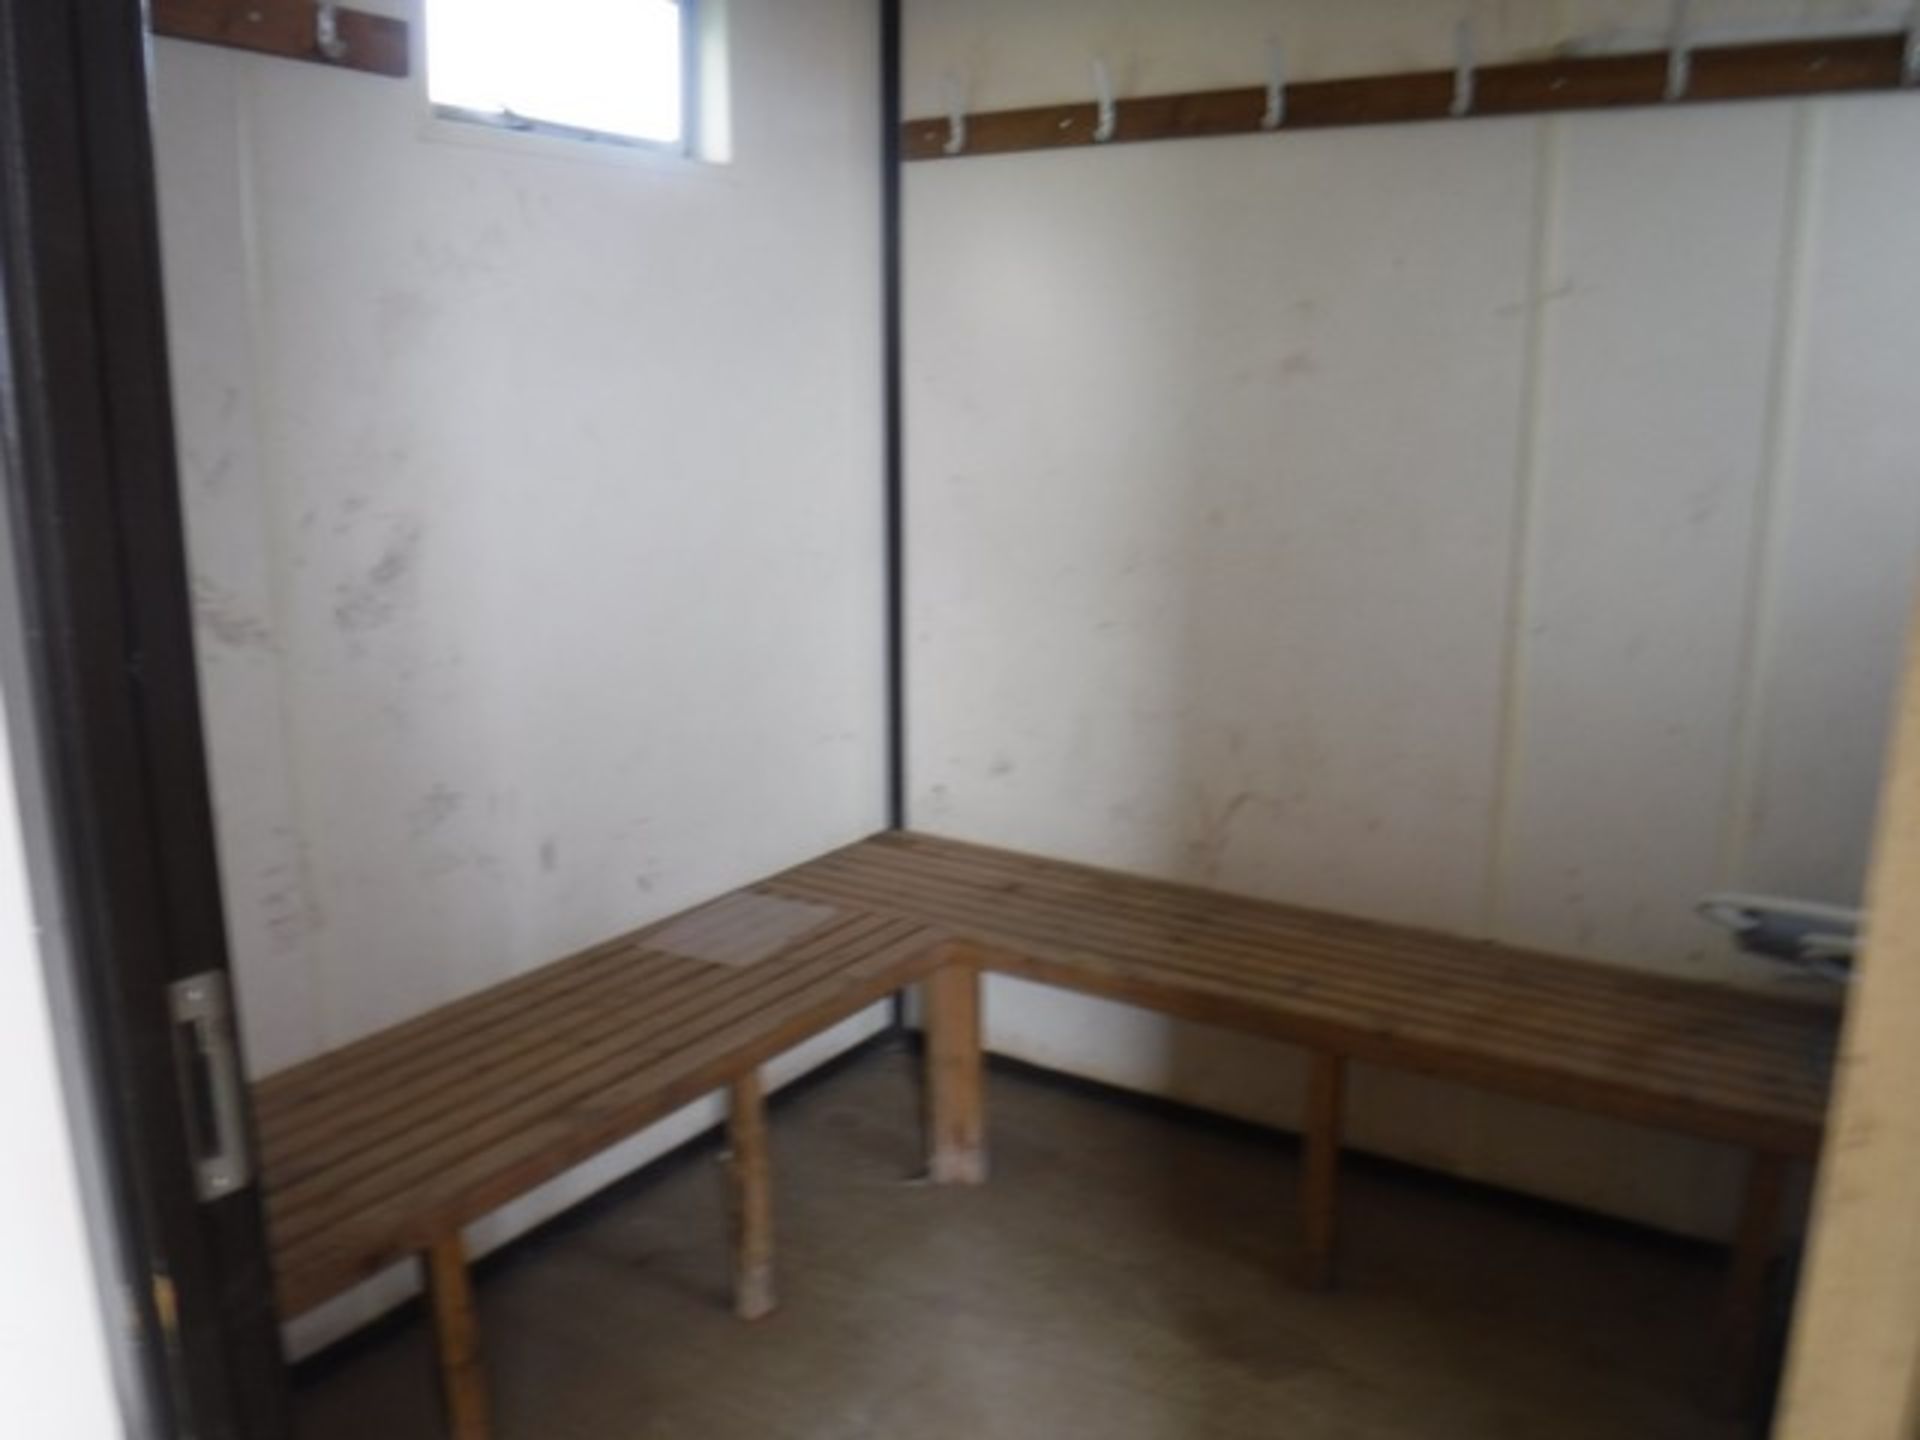 INTEGRA 32 x 10FT ANTI VANDAL UNIT C/W CANTEEN, DRYING ROOM AND END TOILET - Image 5 of 8